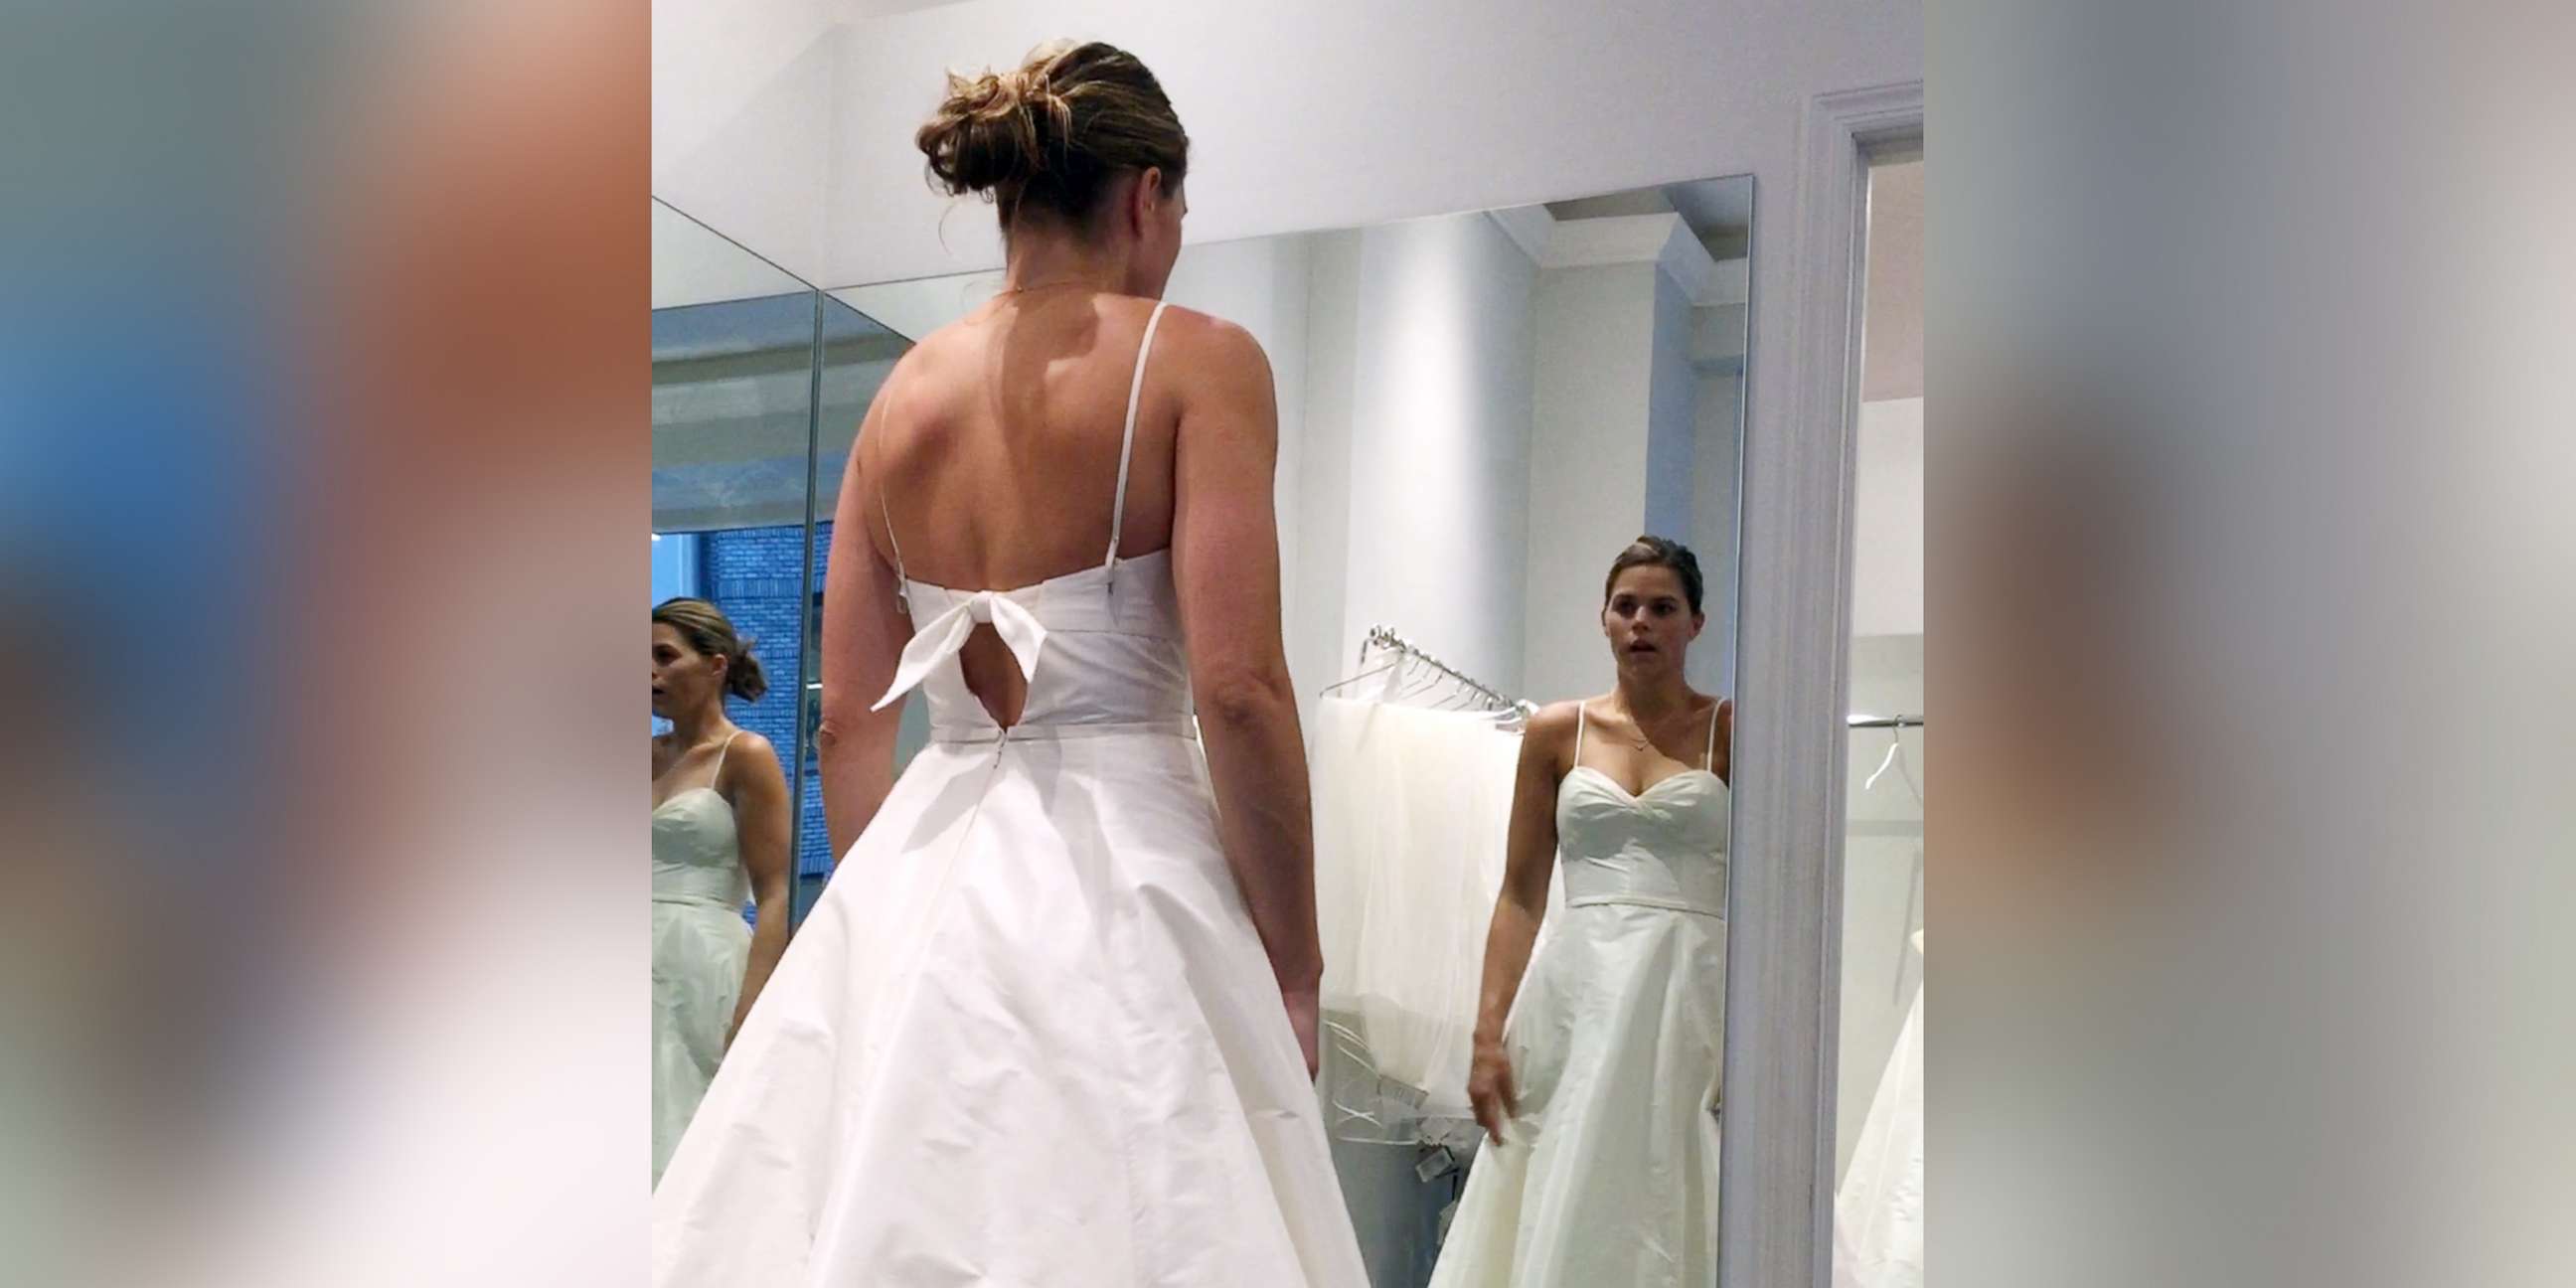 PHOTO: Lanie Parr, of New York City, tries on a wedding dress at the end of "GMA" Train My Way.